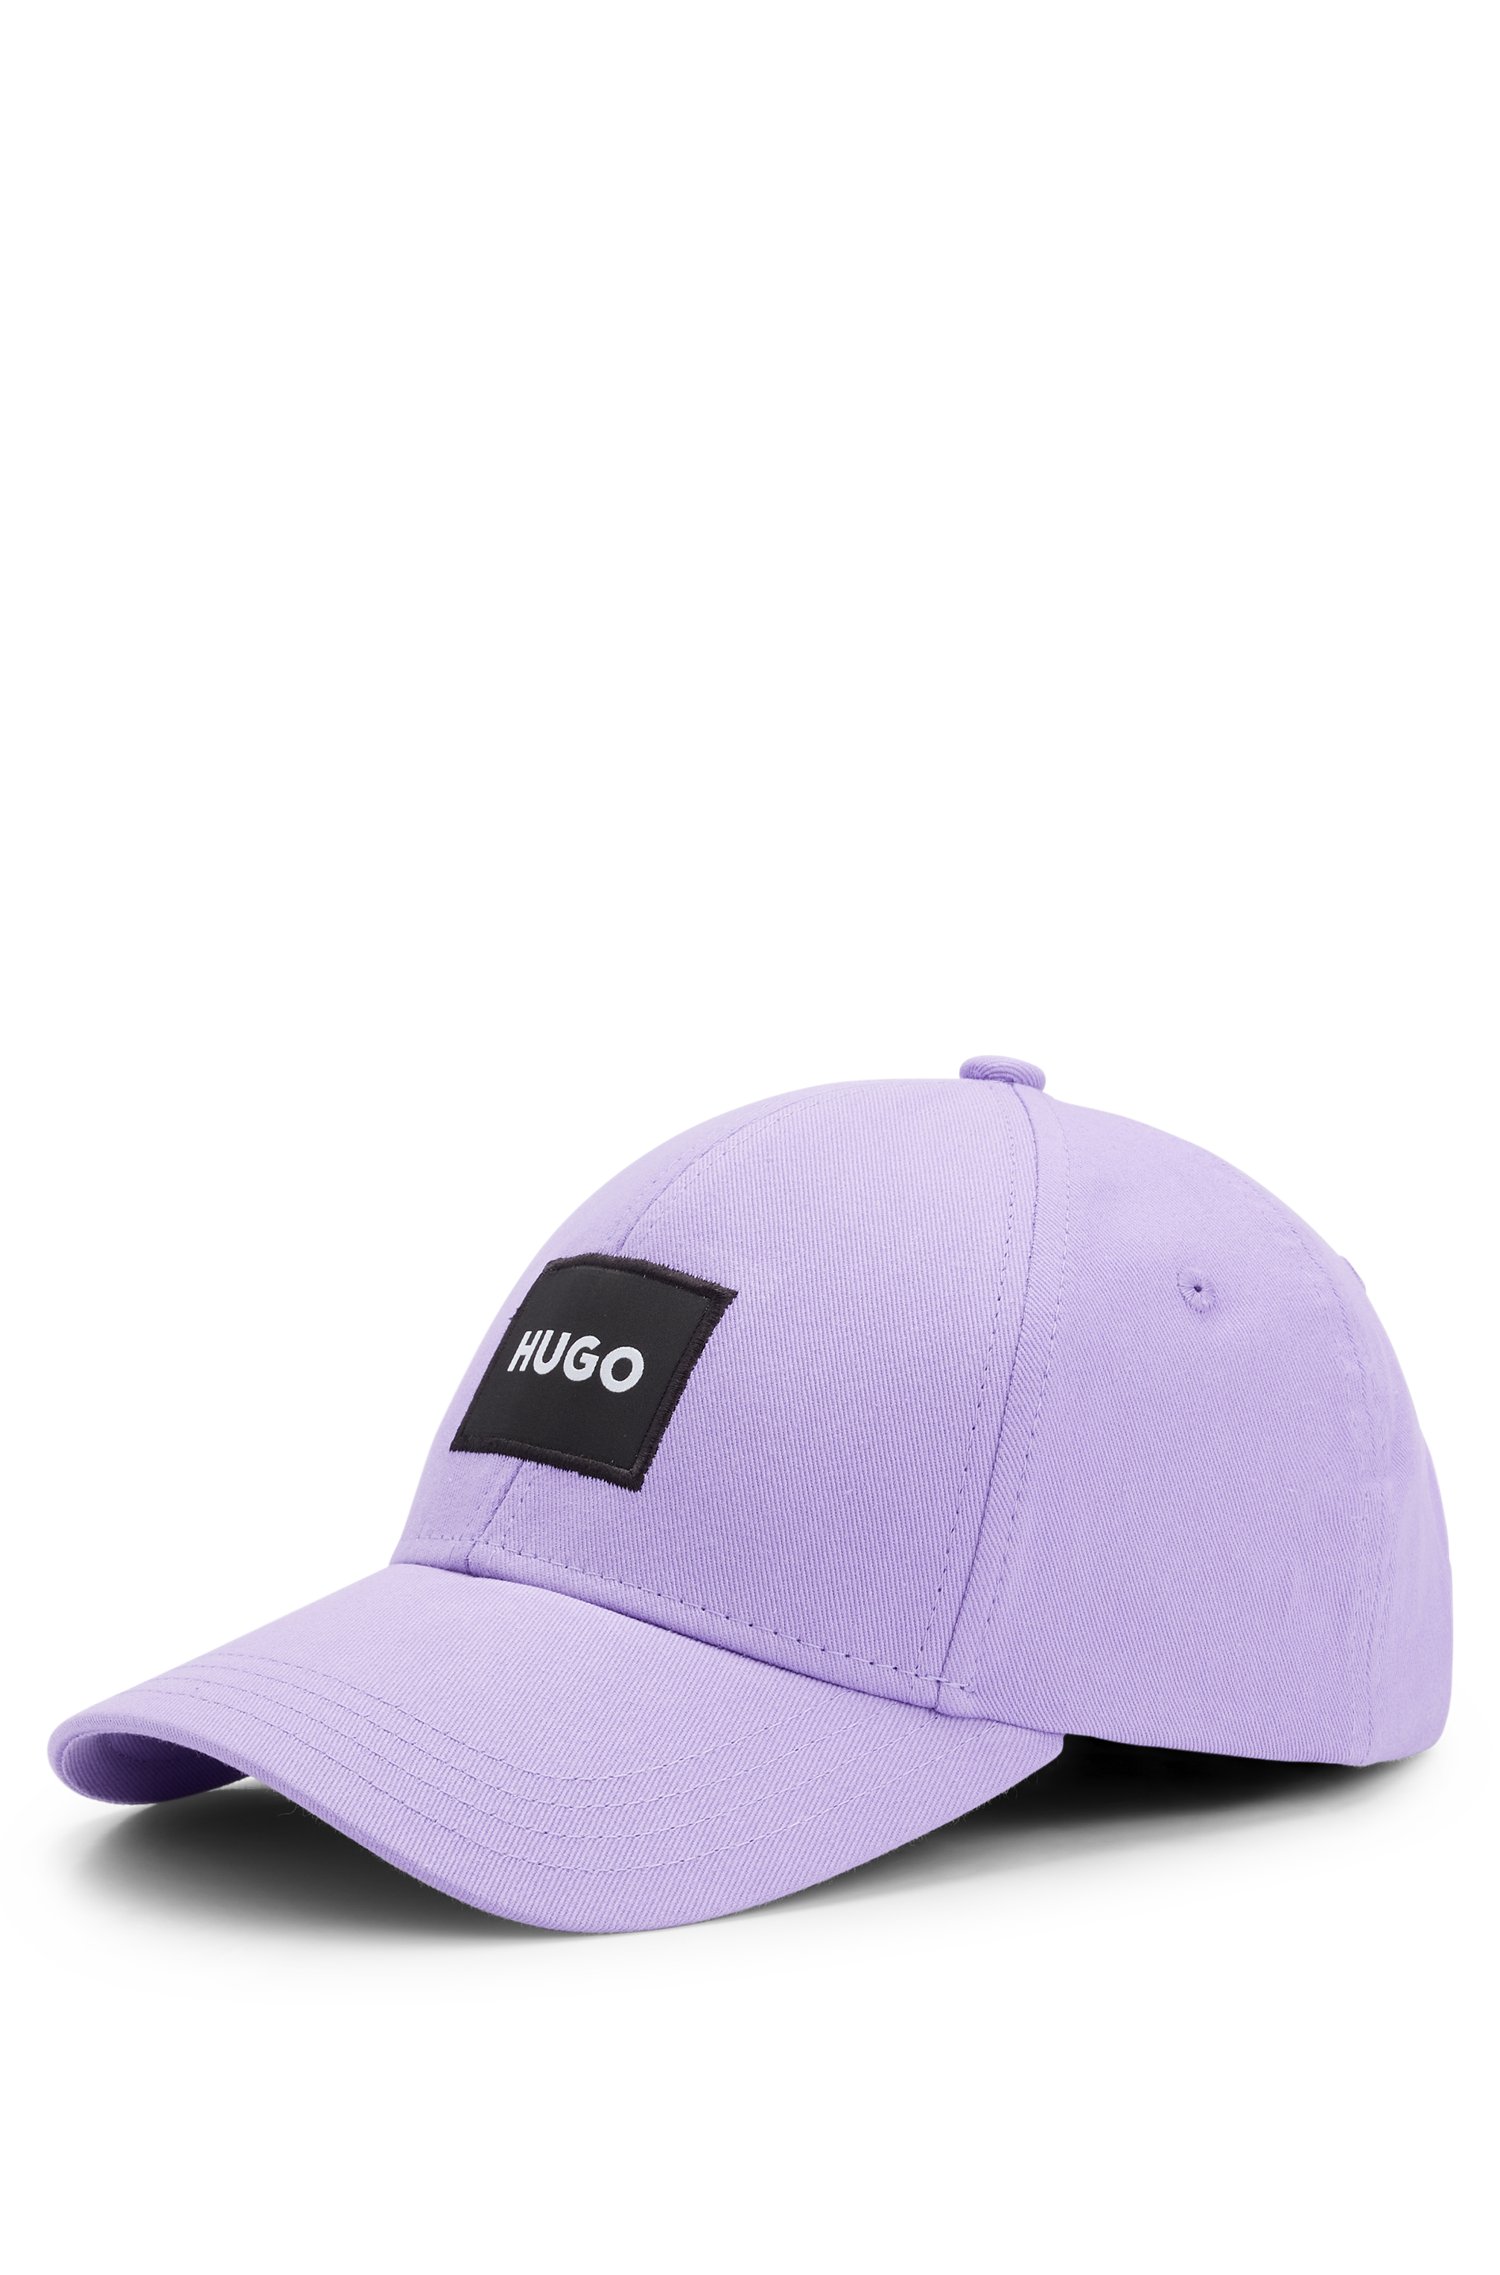 Cotton-twill cap with logo label